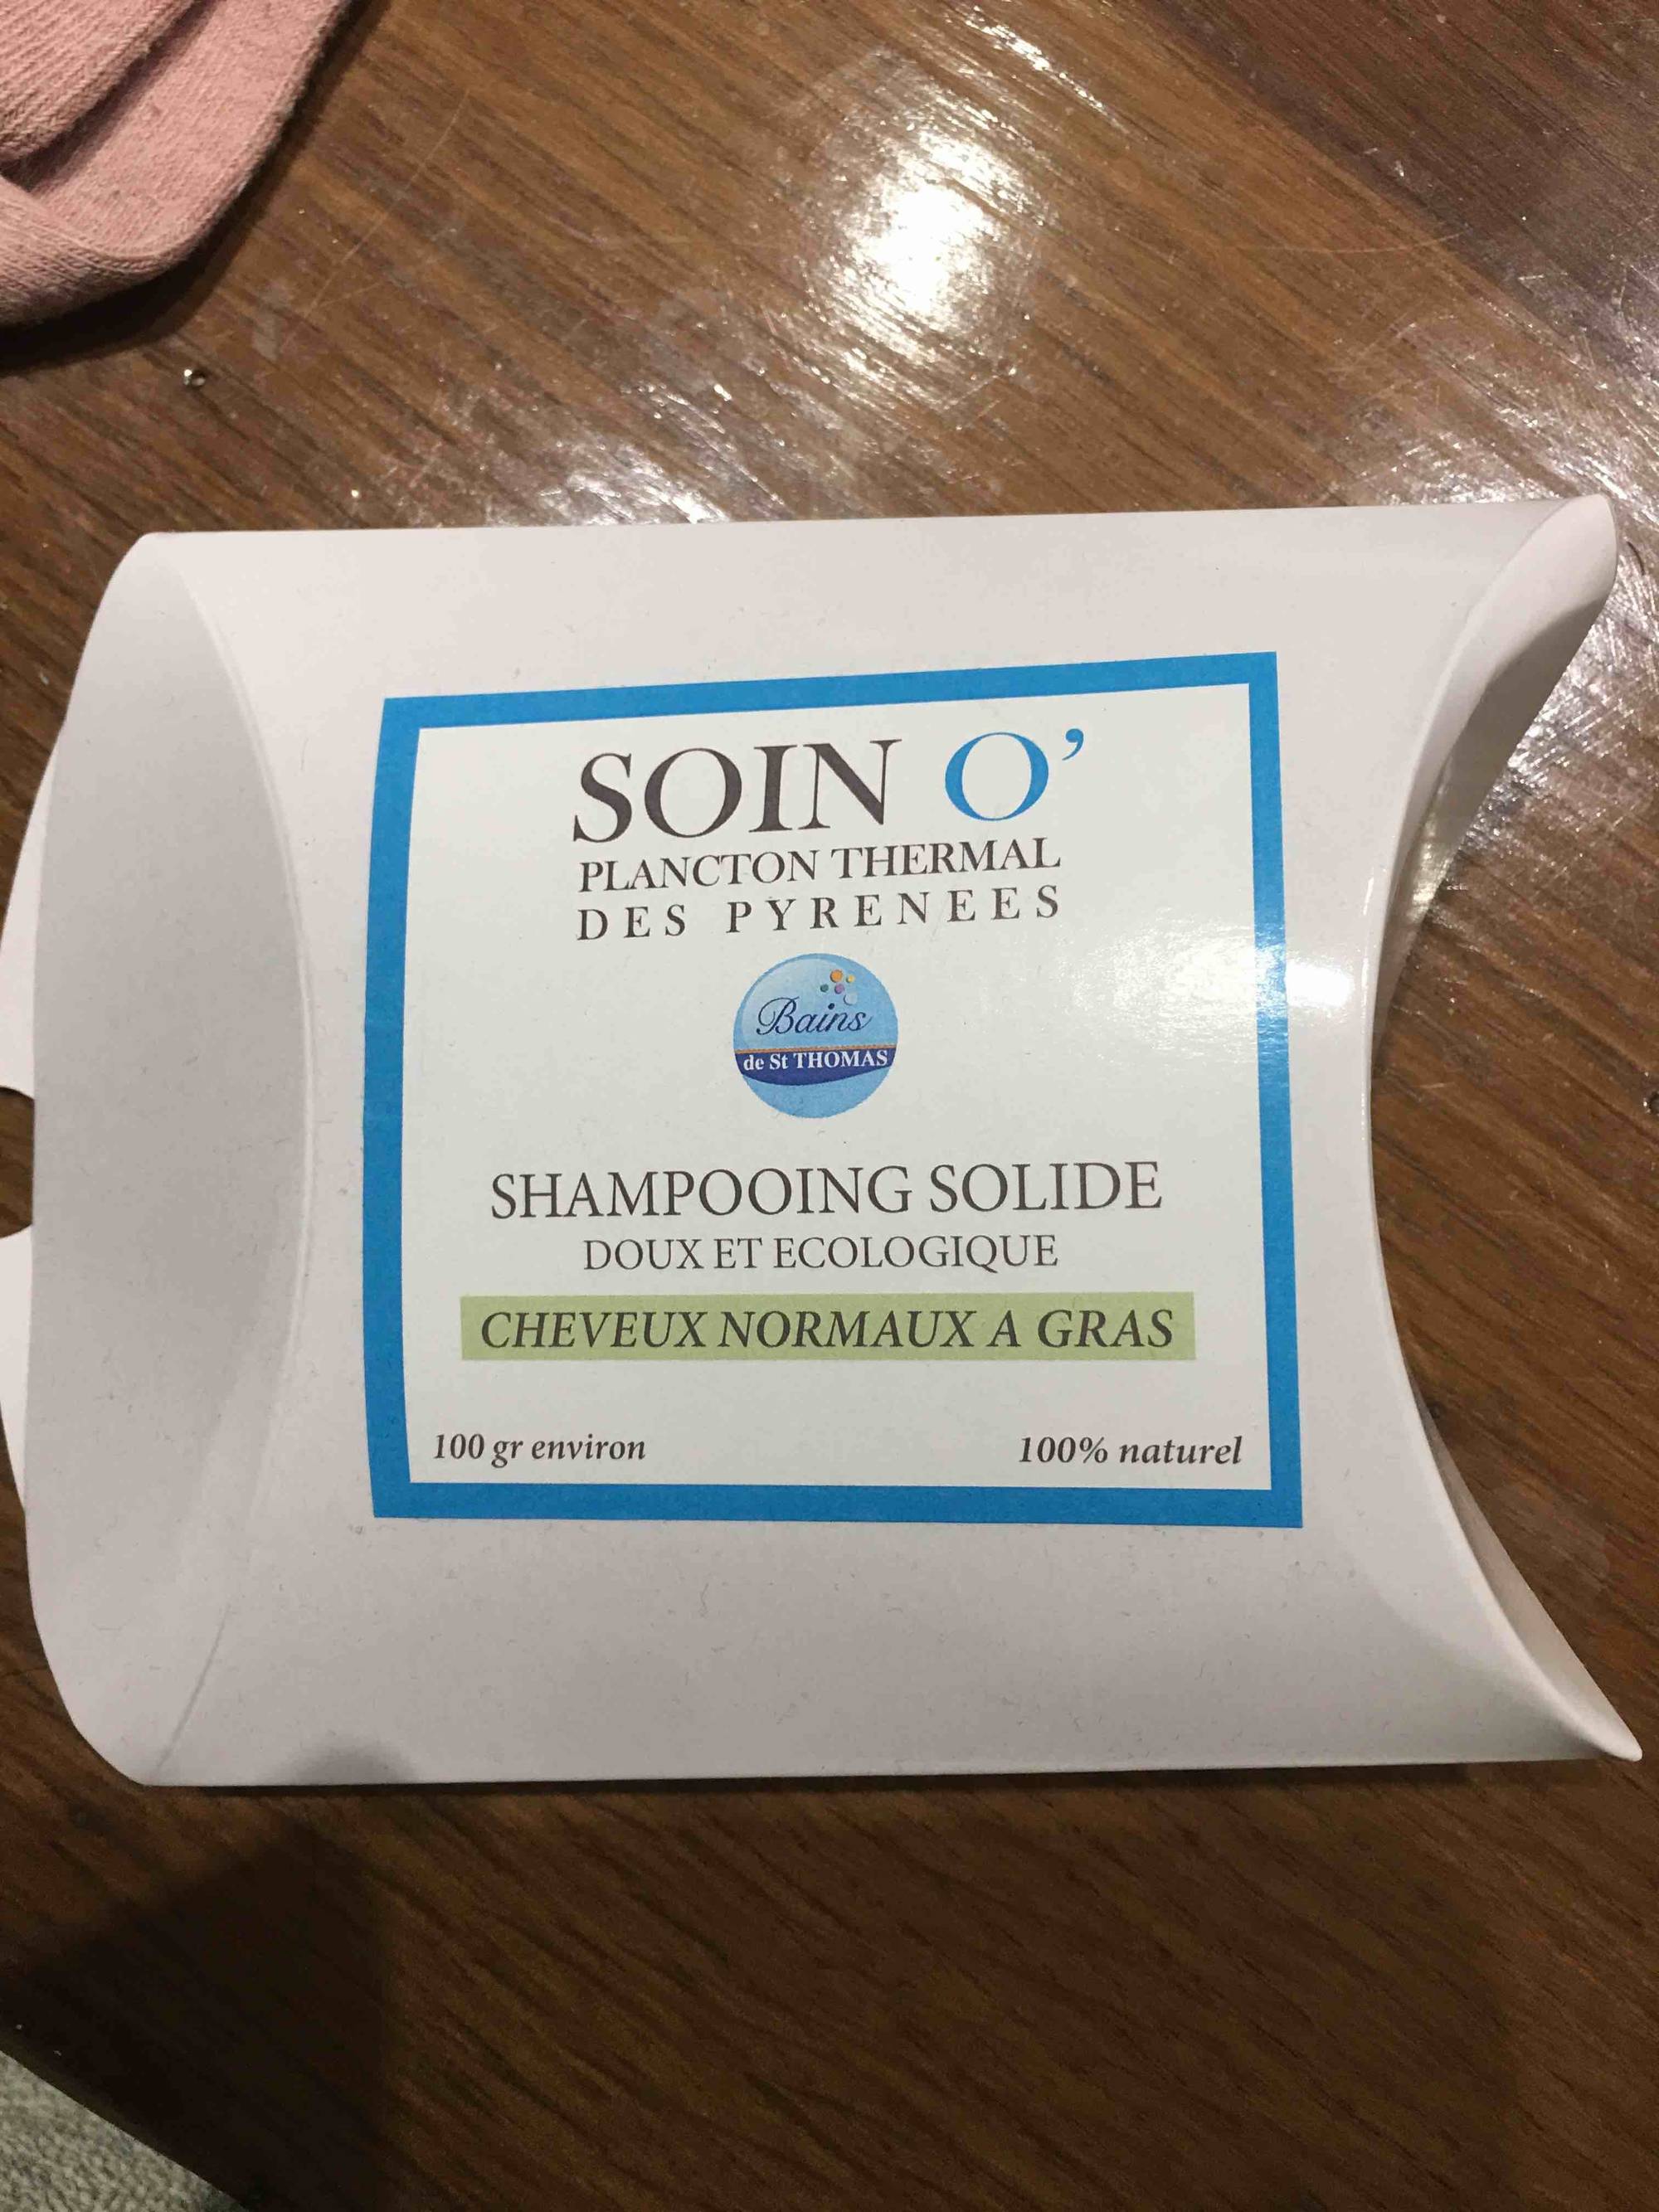 SOIN O' - Shampooing solide cheveux normaux à gras